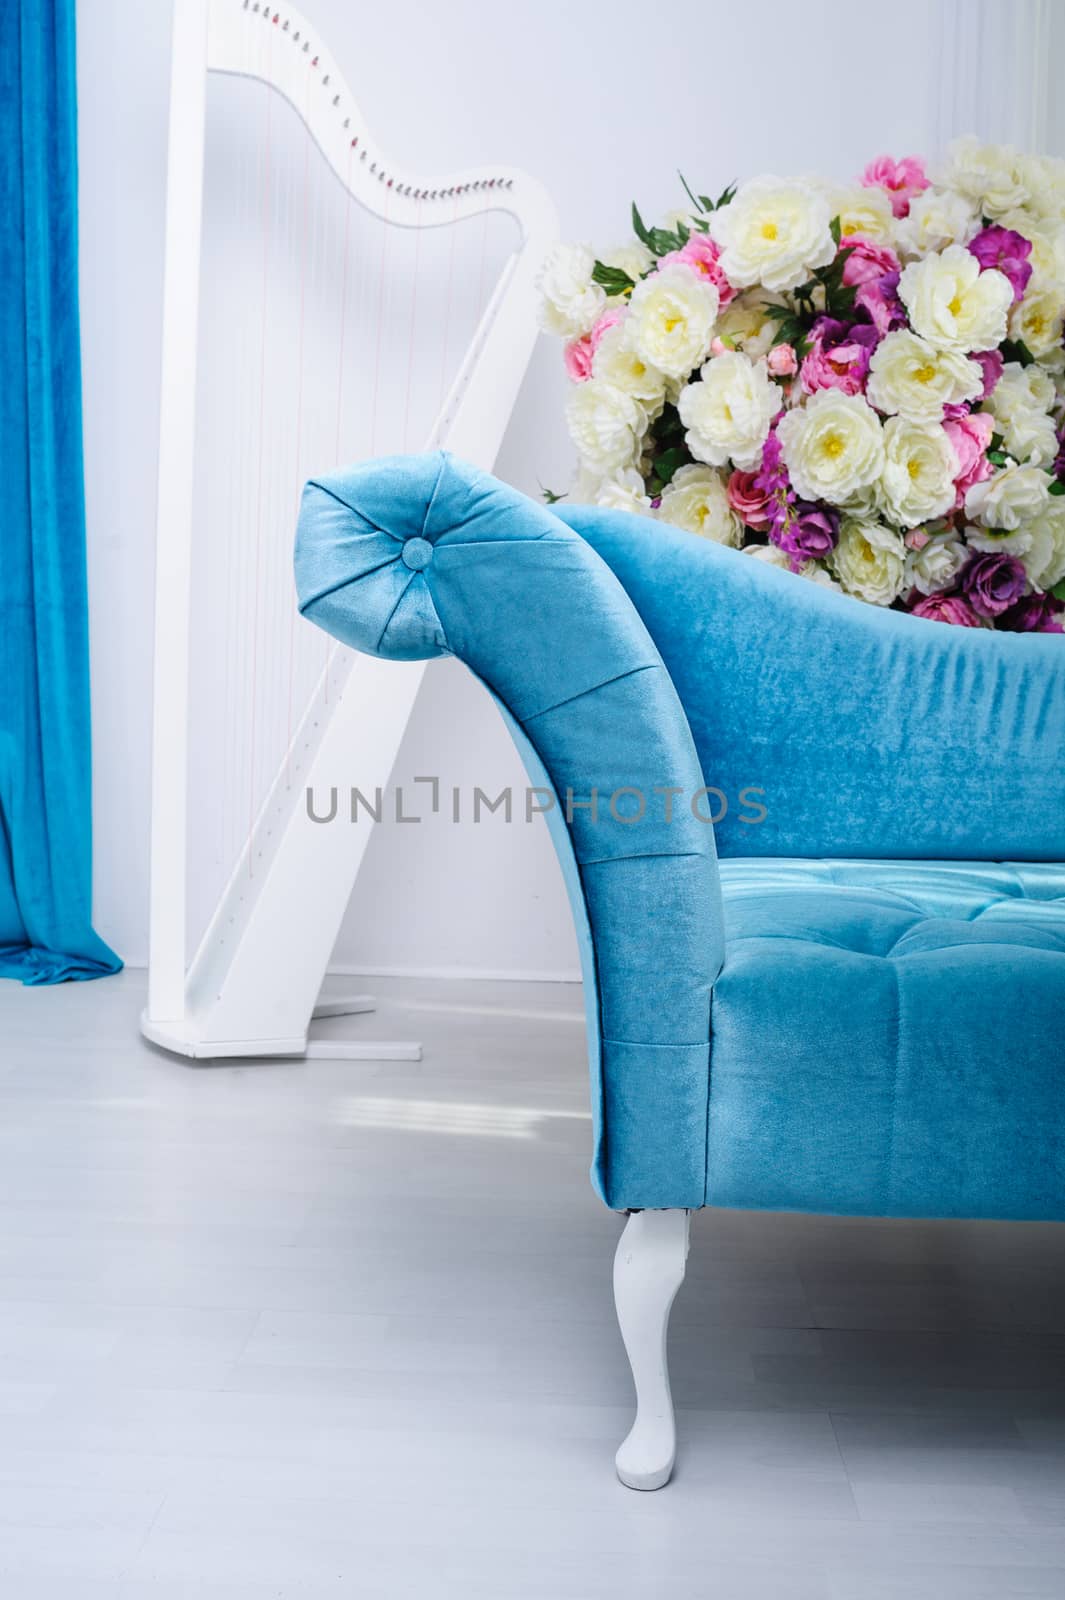 Turquoise sofa and a bouquet of flowers in the Studio.